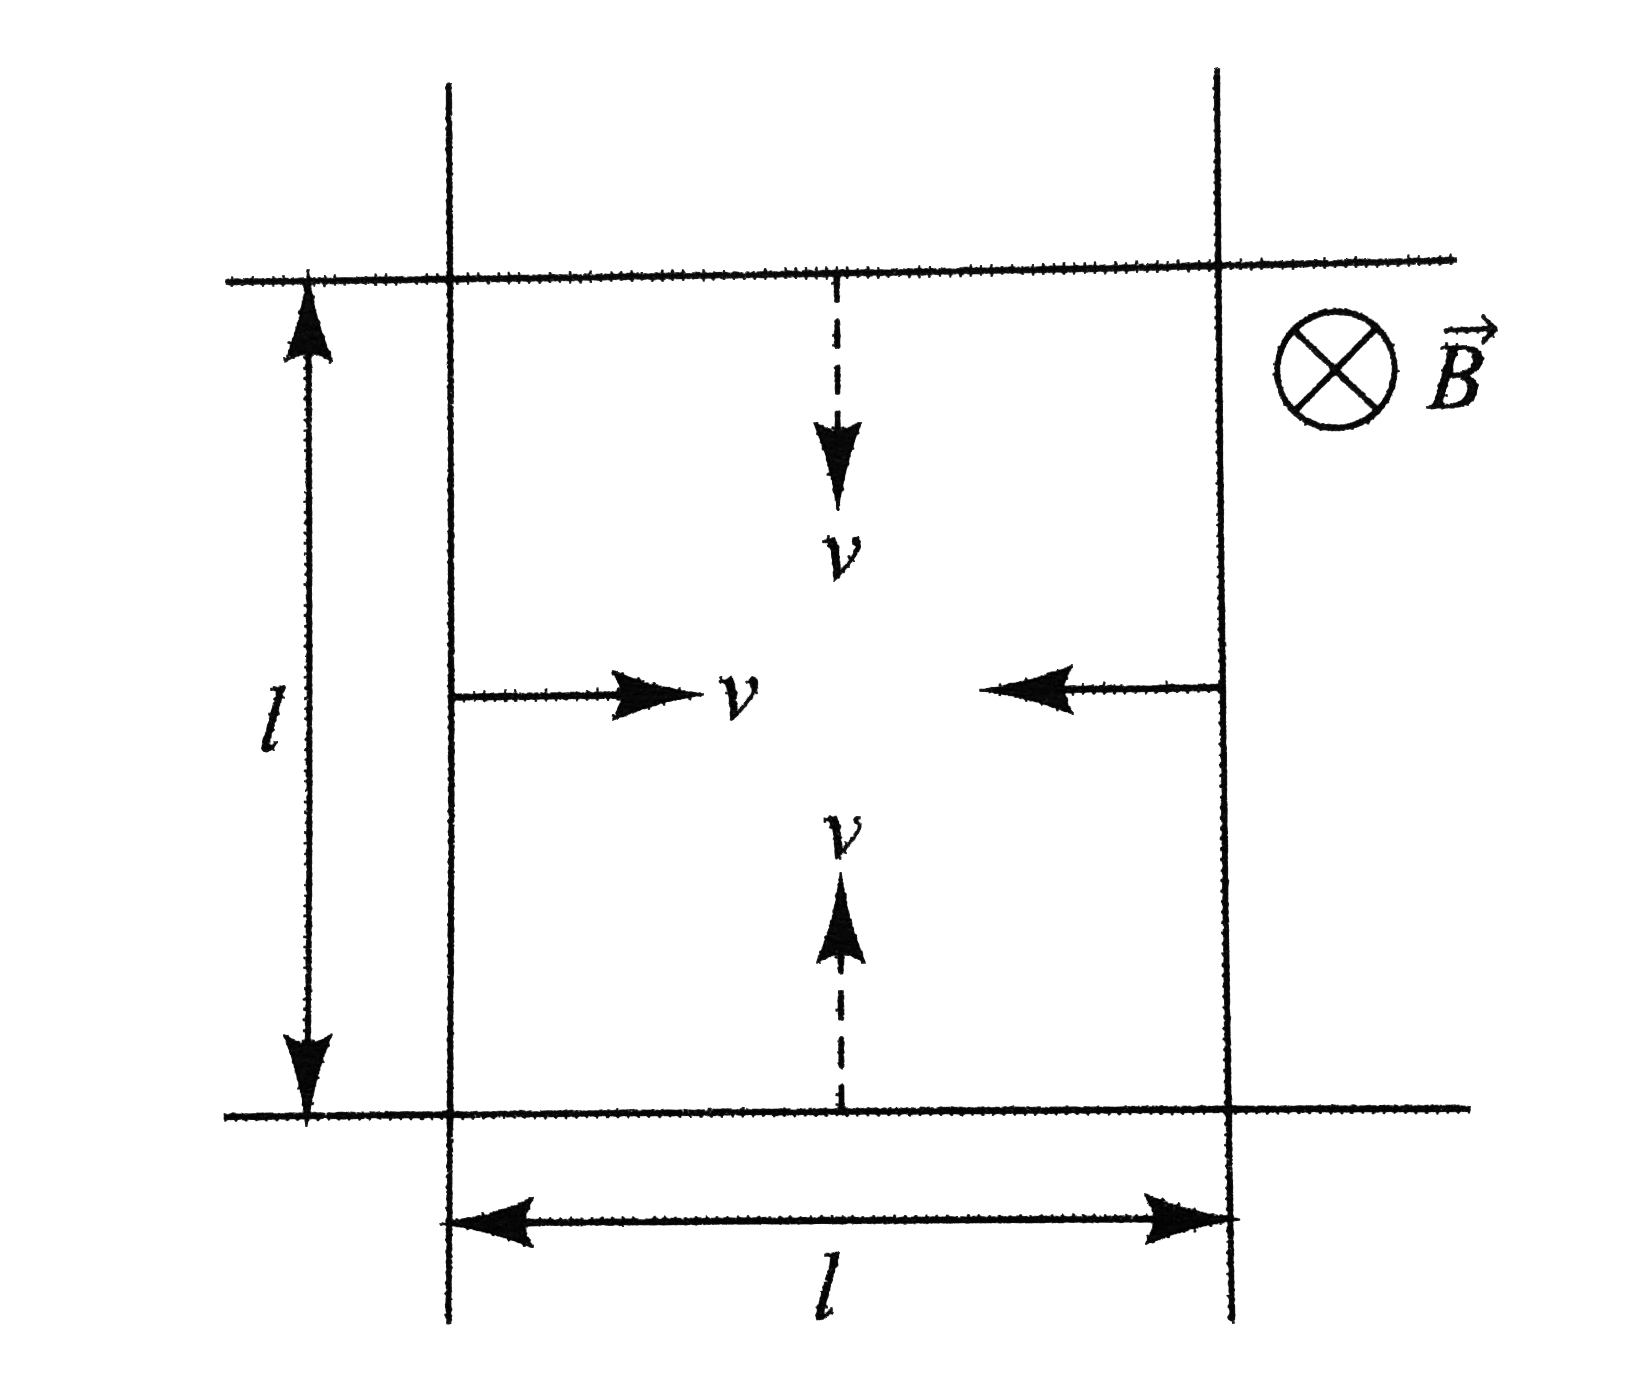 in fig. The four rods have lambda resistance per unit length. The arrengement is kept in a magnetic field of constant magnitude B and directed perpendicular to the plane of the figure and directing in ward. Initially, the sides as shown form a square. Now each wire starts moving with constant velocity v toward the opposite wire.   Find as a function of time:   (a) induced emf in the circuit.   (b) induced current in the circuit with direction.   ( c ) force required on each wire to keep its velocity consatnt.   (d) total power required to maintain constant velocity.   (e) thermal power developed in the circuit.